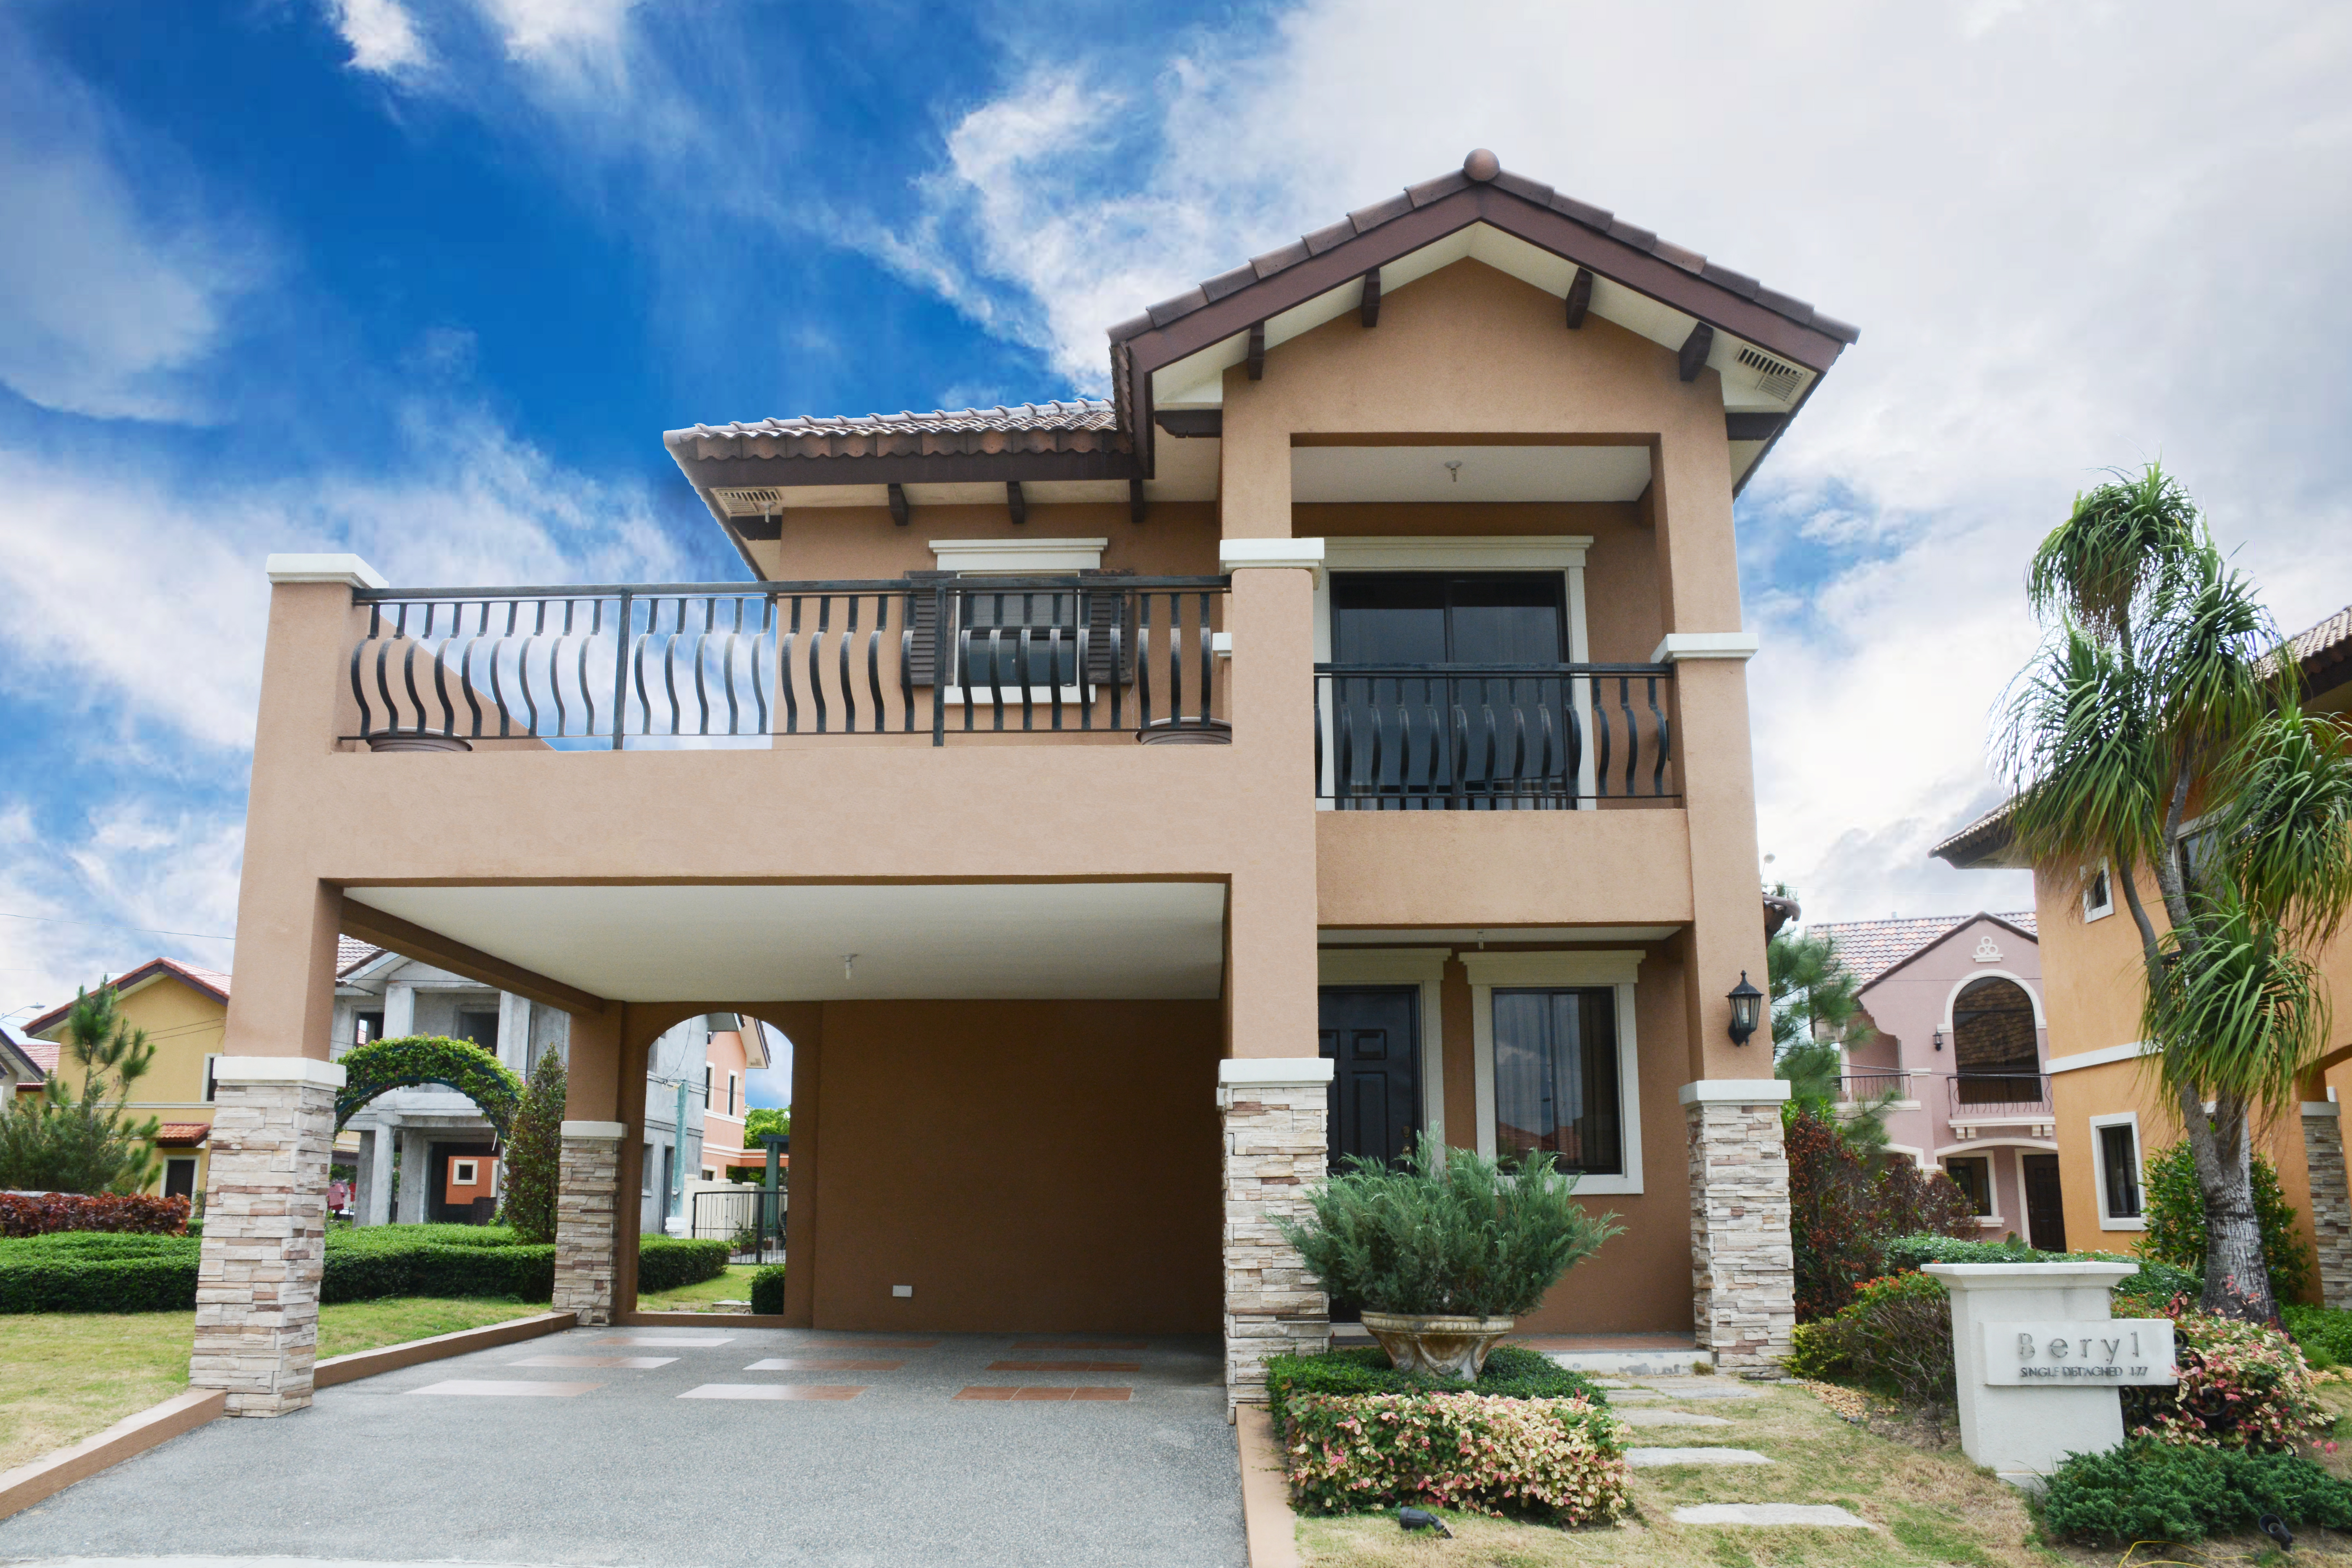 Pre-selling House and Lot Property in Bacoor City (Vita Tocscana)